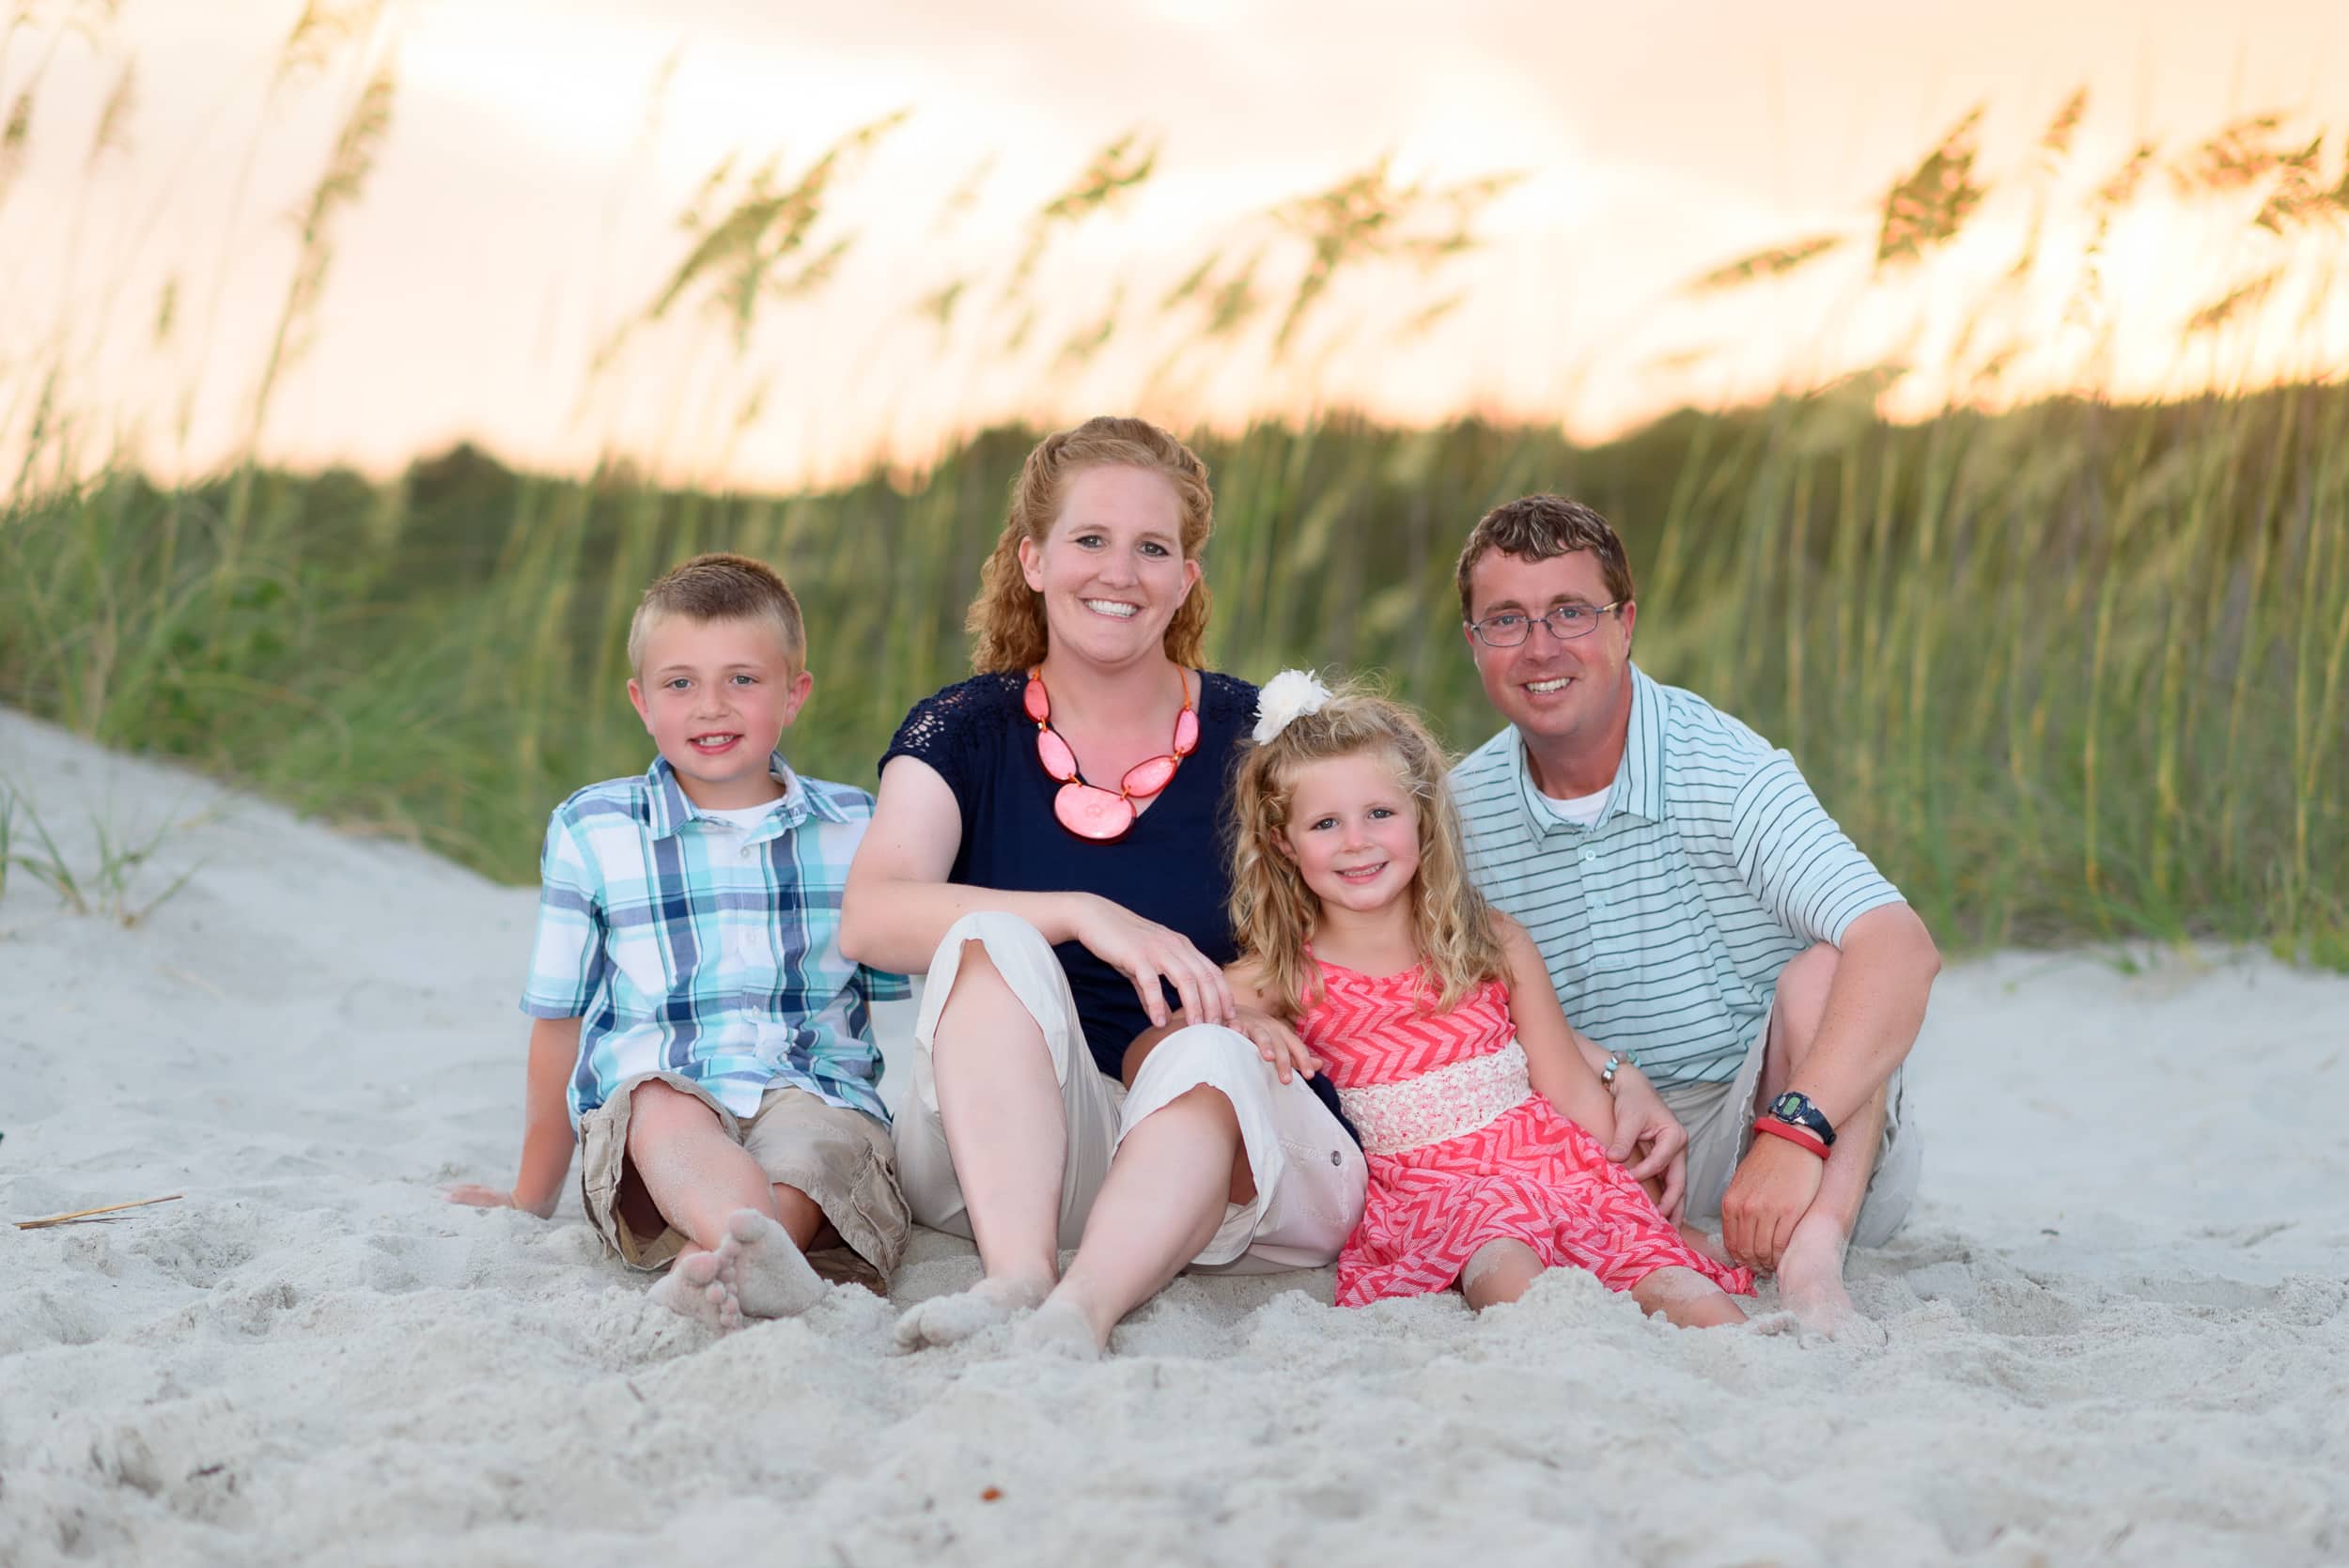 Family of 4 in the sunset by the sea oats - Myrtle Beach